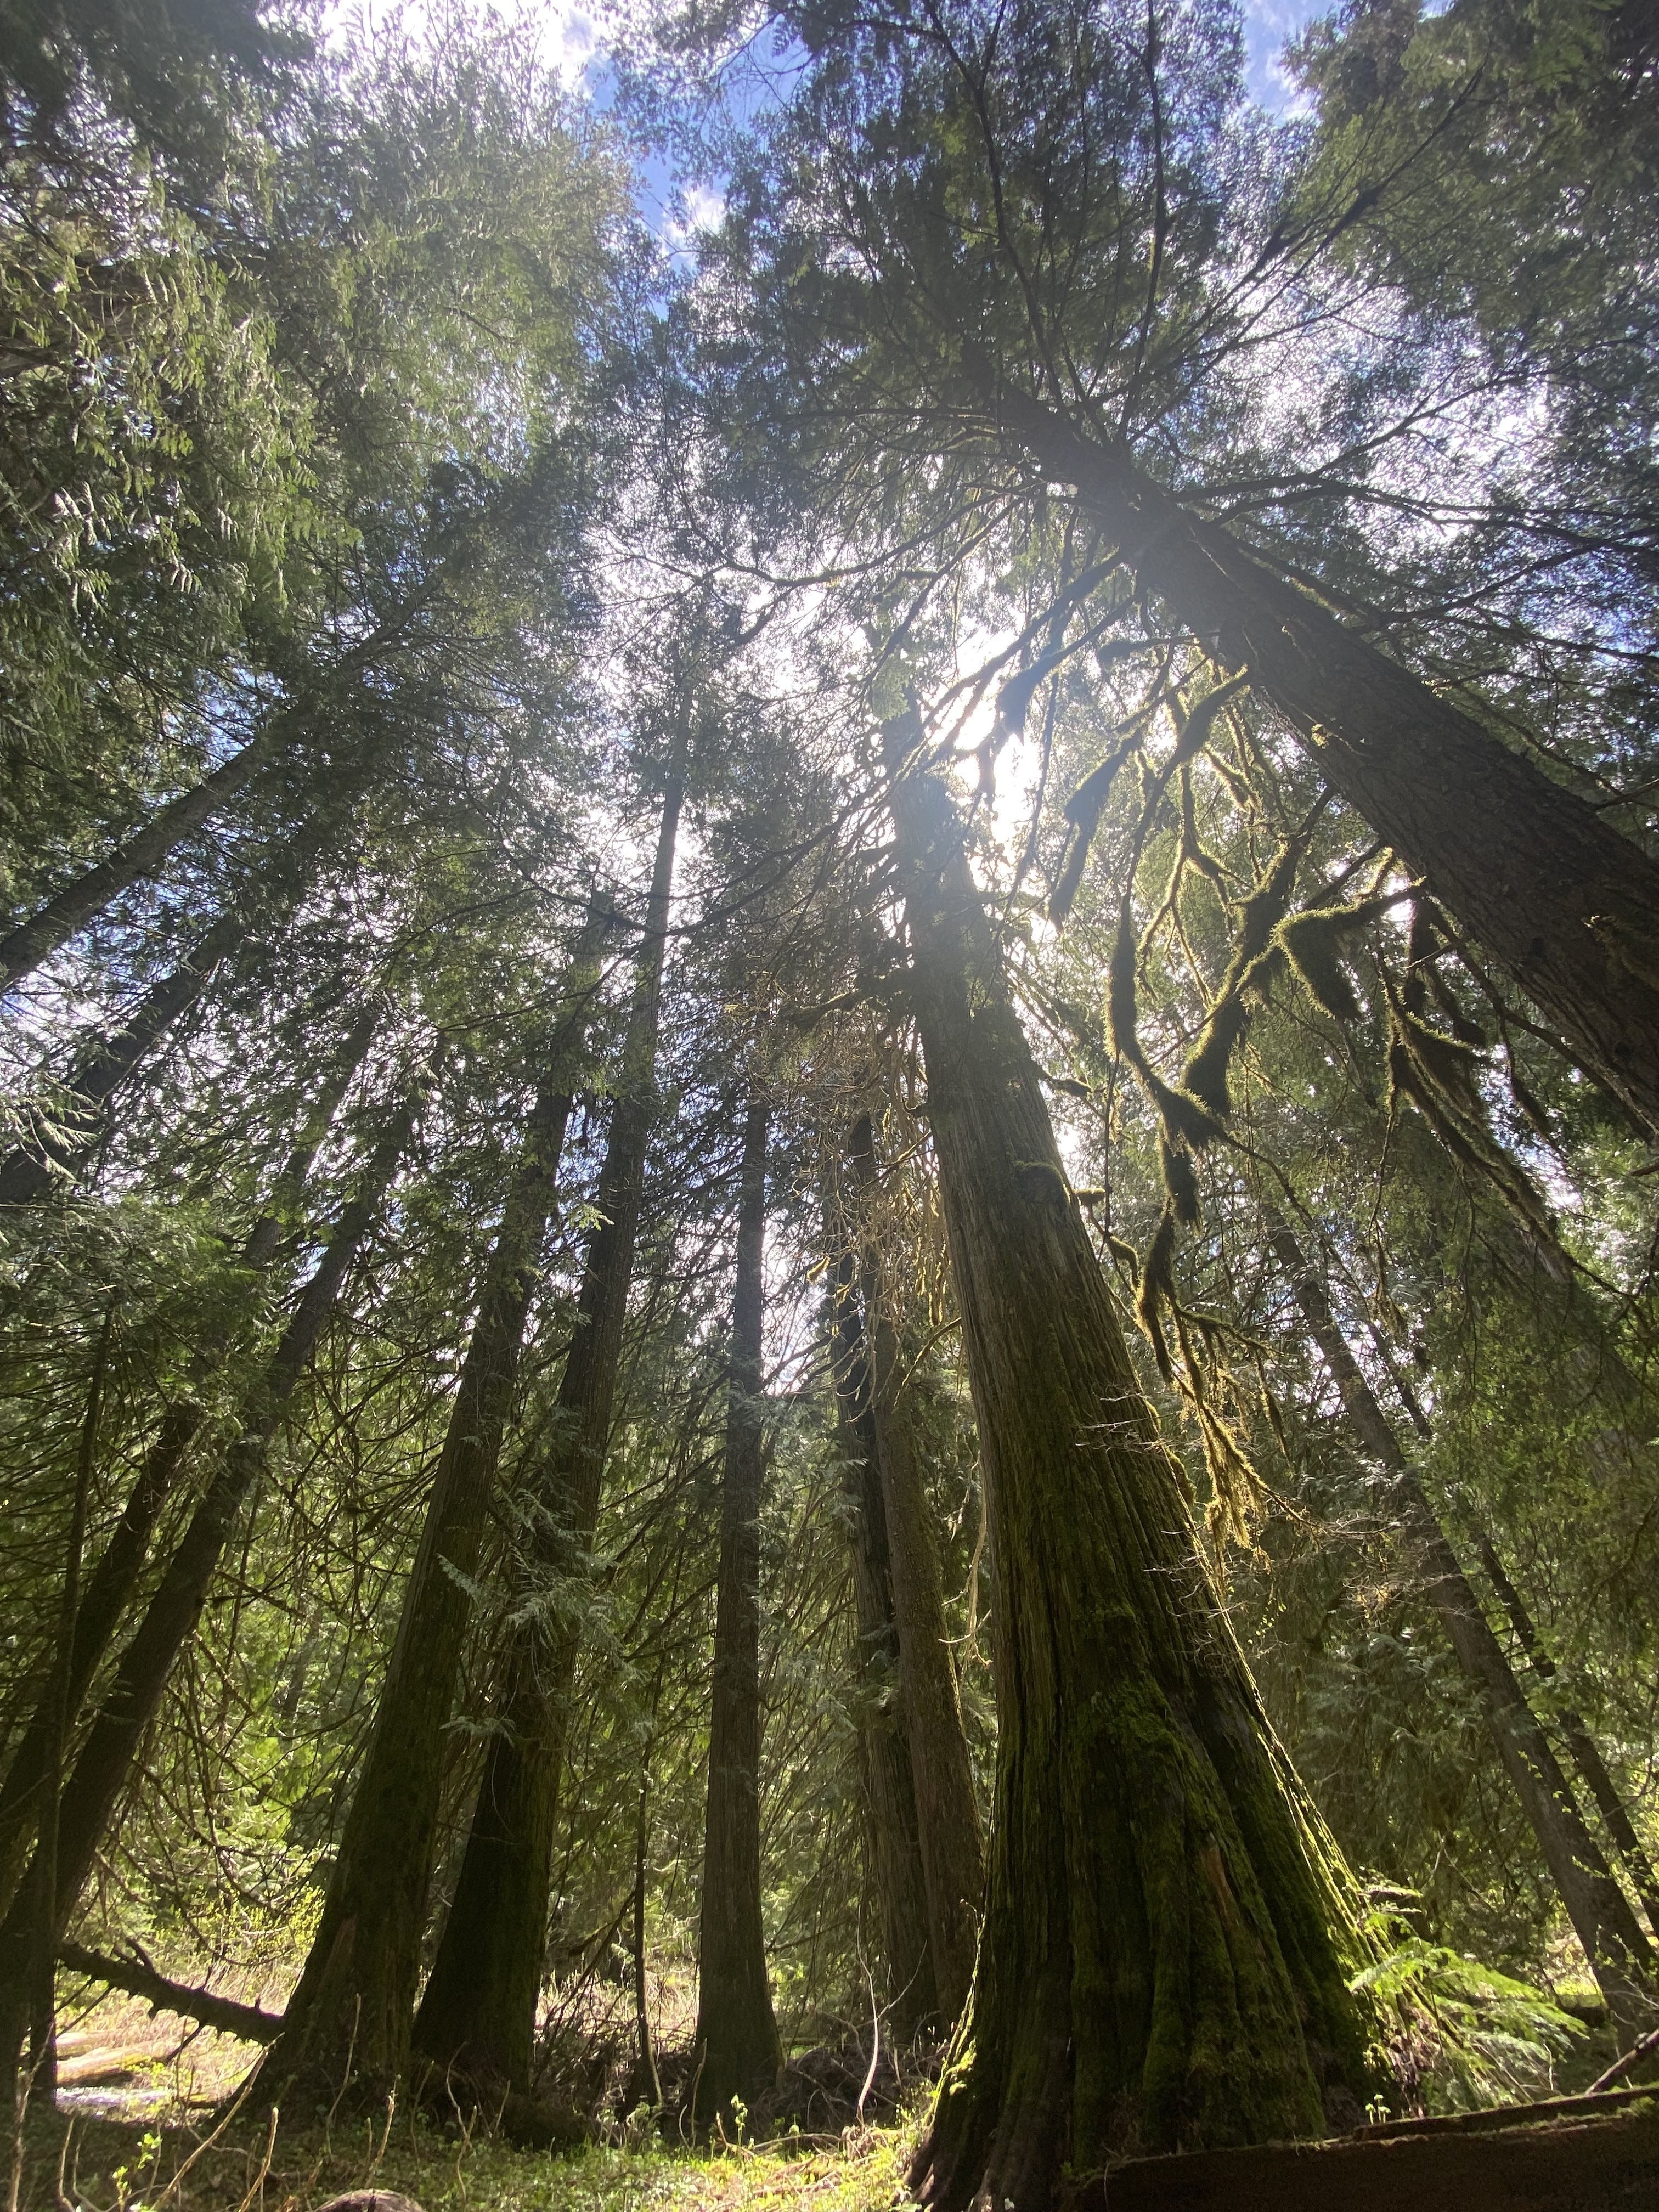 A view from the ground up towards a canopy of cedar trees.